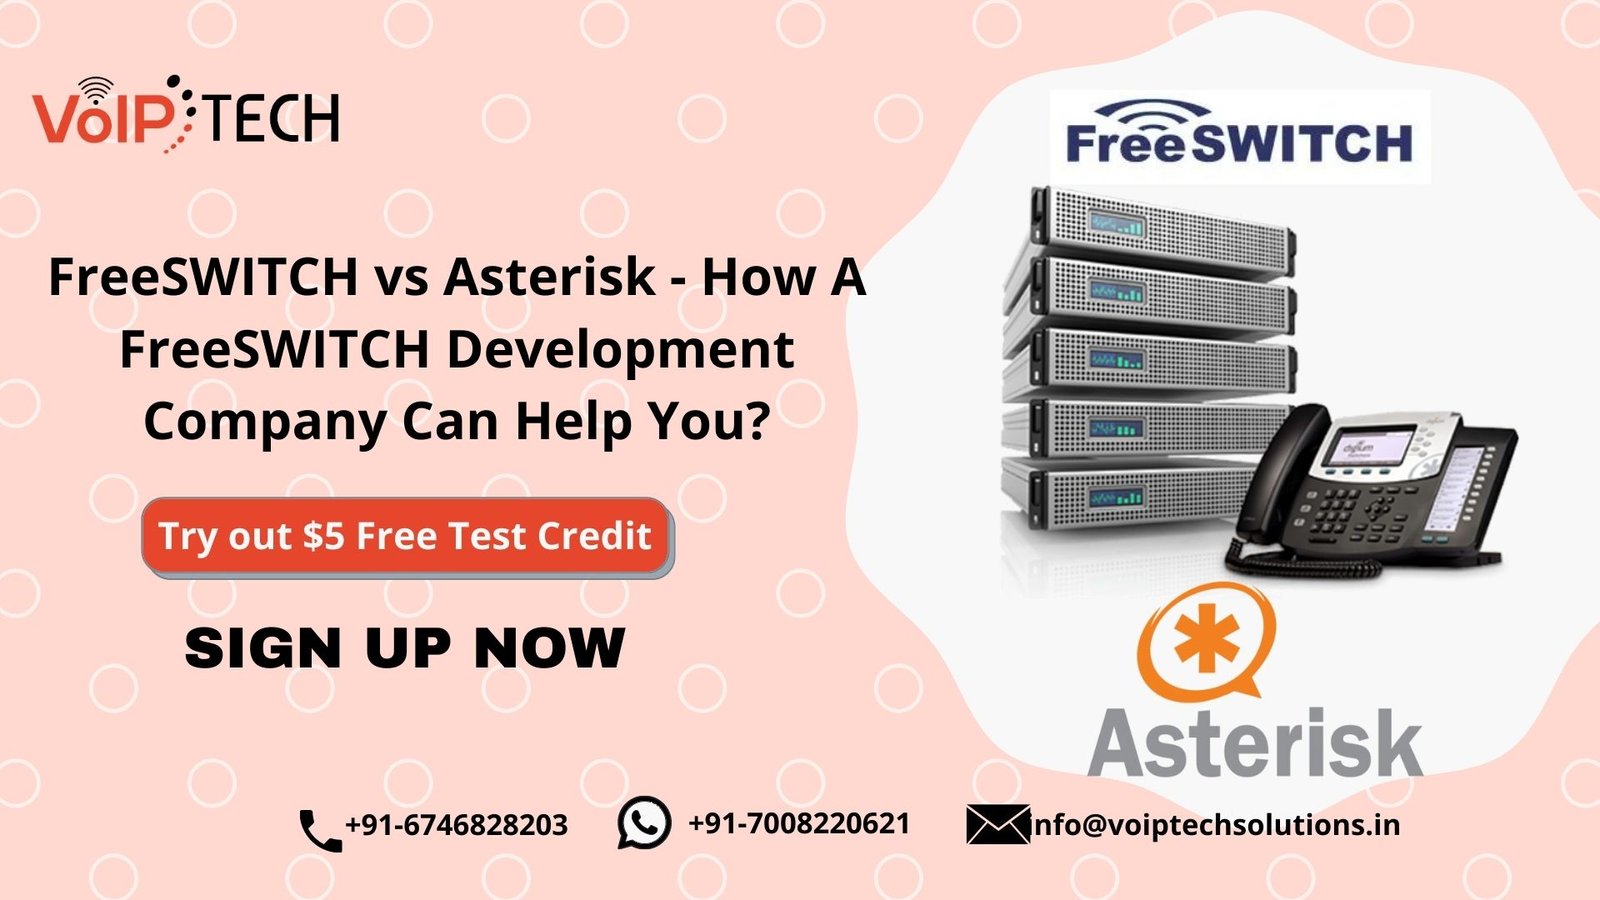 FreeSWITCH Development Company, FreeSWITCH vs Asterisk - How A FreeSWITCH Development Company Can Help You?, VoIP tech solutions, vici dialer, virtual number, Voip Providers, voip services in india, best sip provider, business voip providers, VoIP Phone Numbers, voip minutes provider, top voip providers, voip minutes, International VoIP Provider